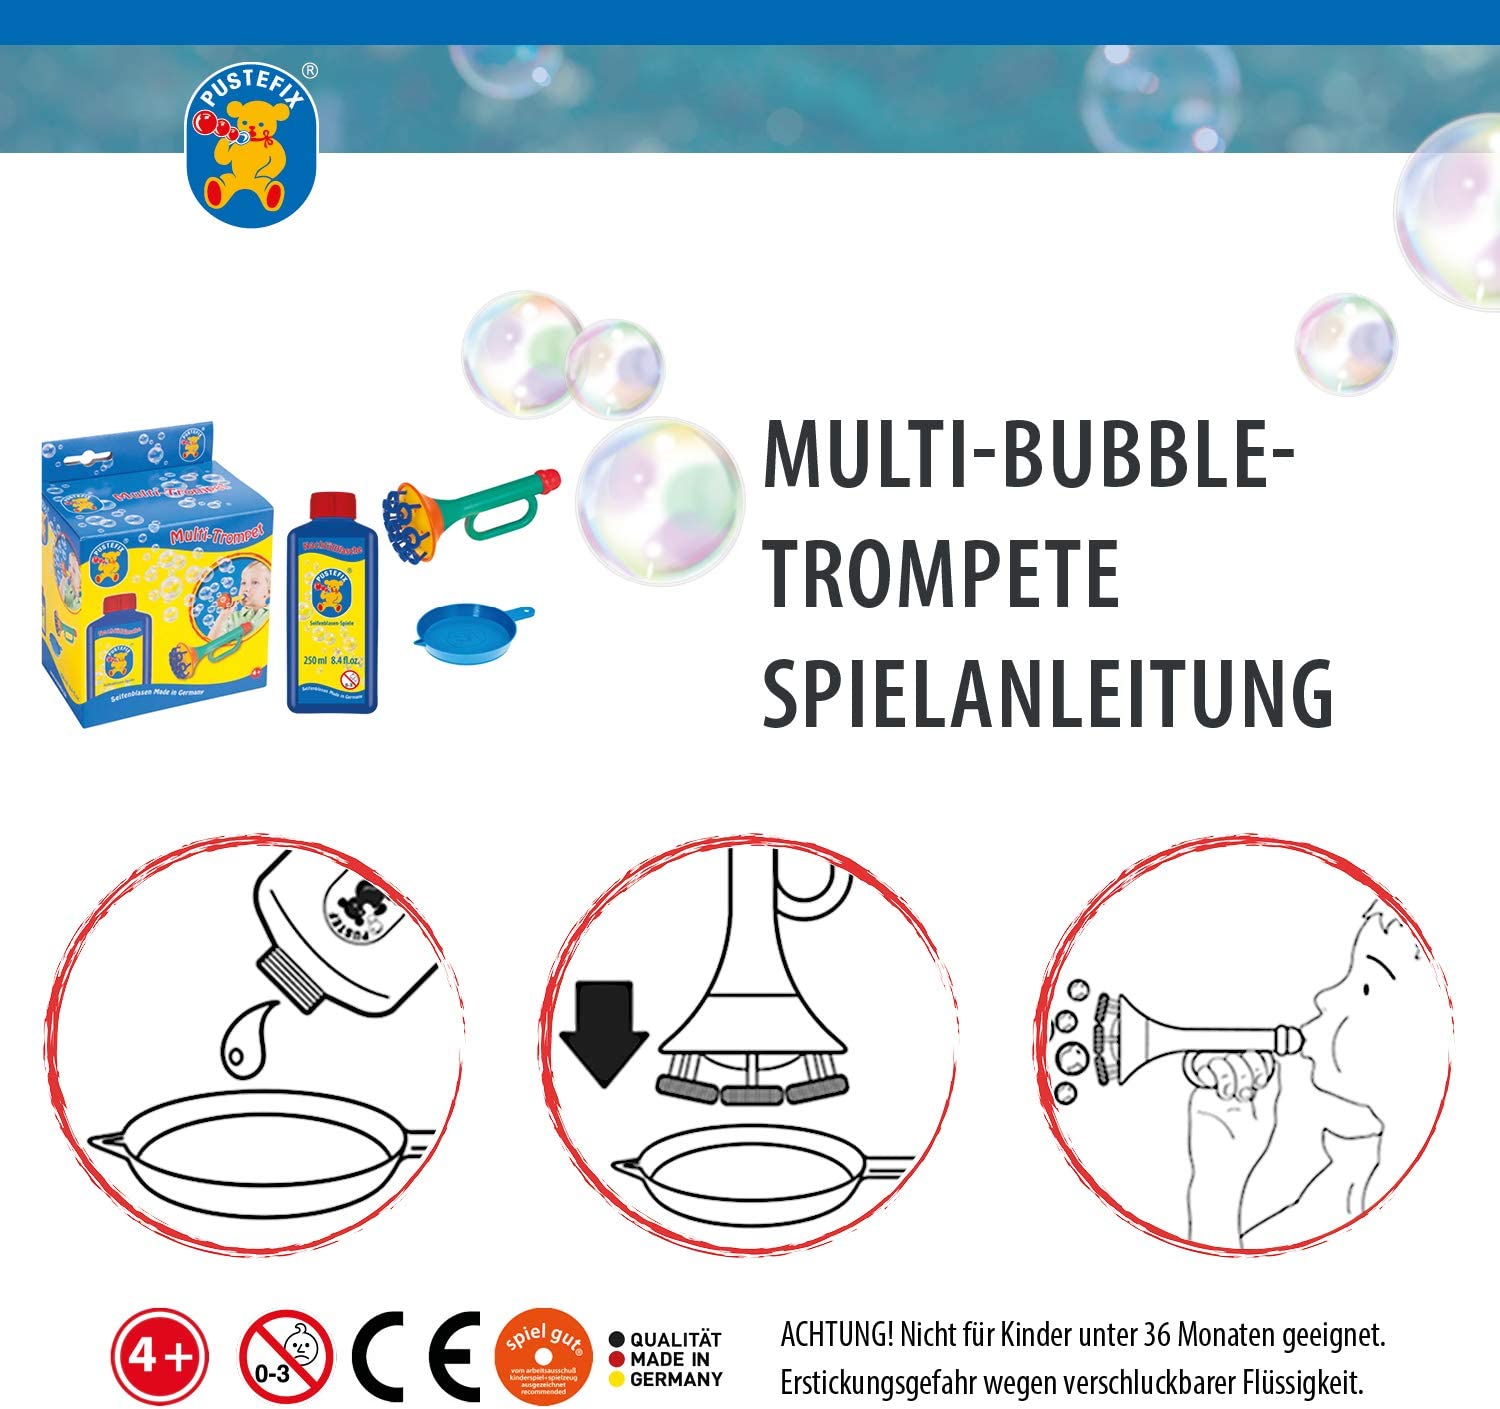 Bubble Trumpet Blowing Toy for Kids Set Includes Trumpet Blower 8.45 Oz Bubbles Bottle And Liquid Tray